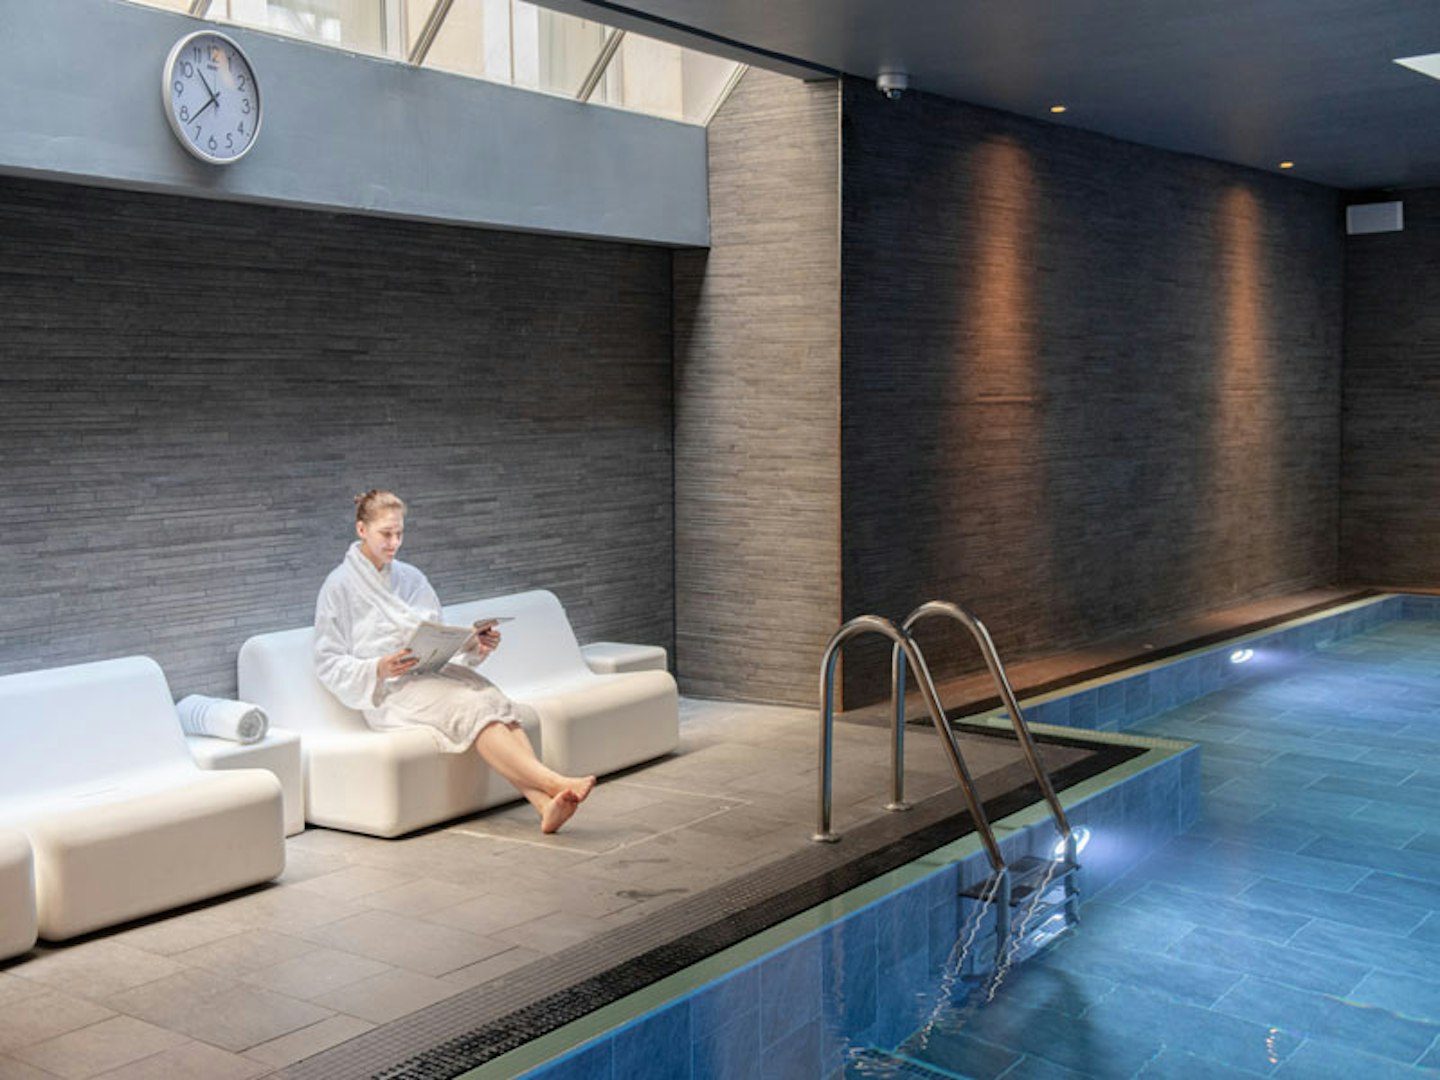 Vitality Pool? What to expect from luxurious and relaxing vitality pools |